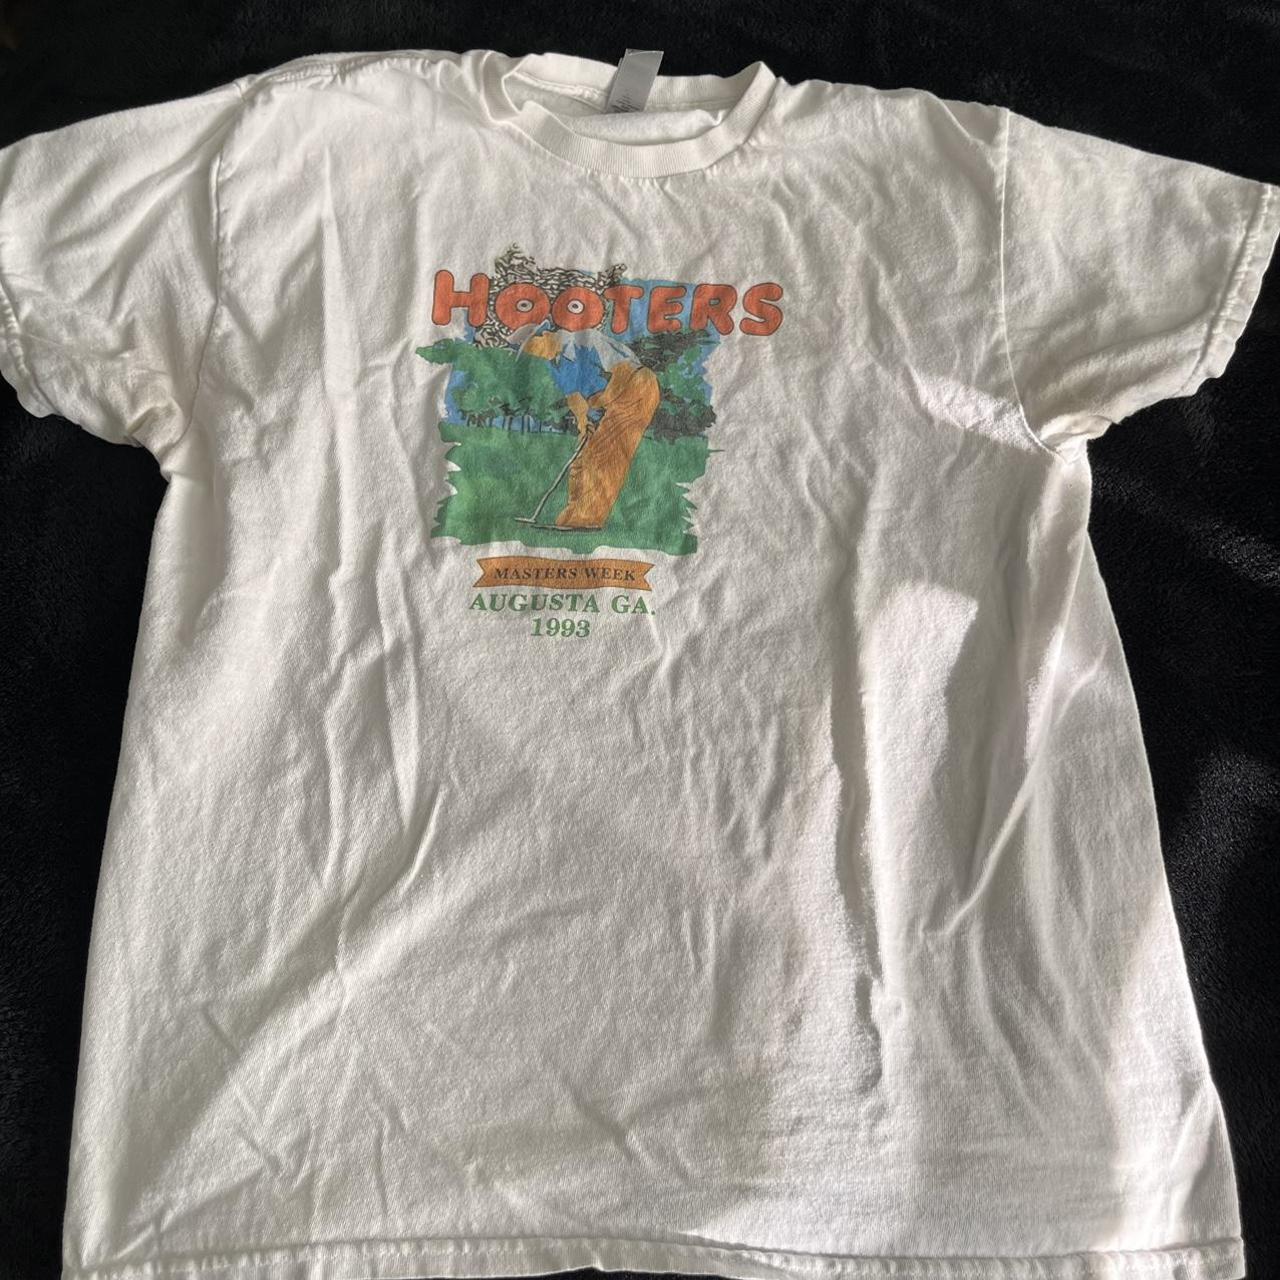 Hooters t shirt ️ Perfect condition never worn, just... - Depop